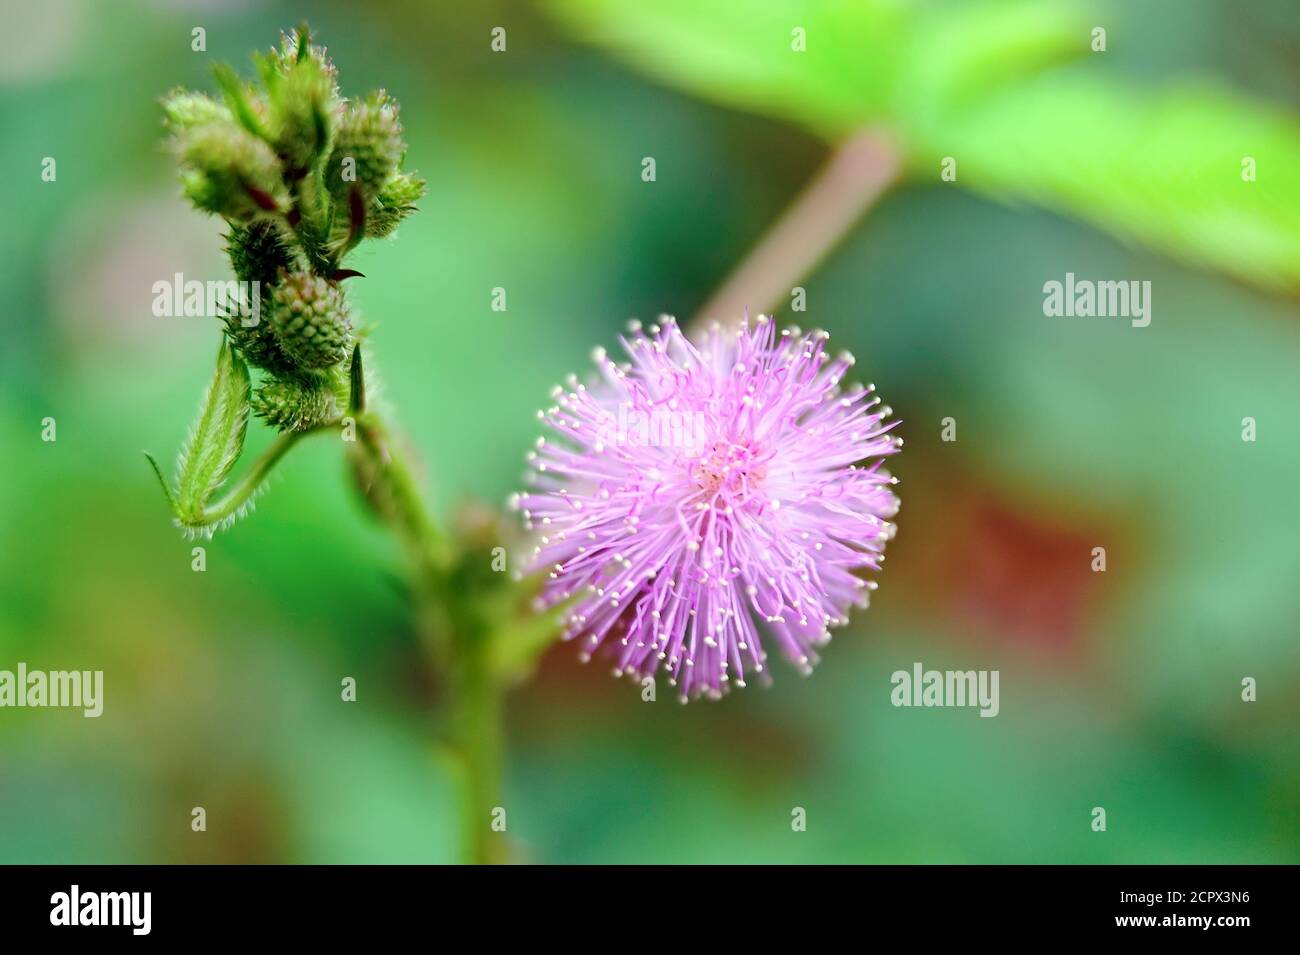 Mimosa pudica, also called sensitive plant, sleepy plant, action plant, touch-me-not,shameplant, zombie plant. Stock Photo